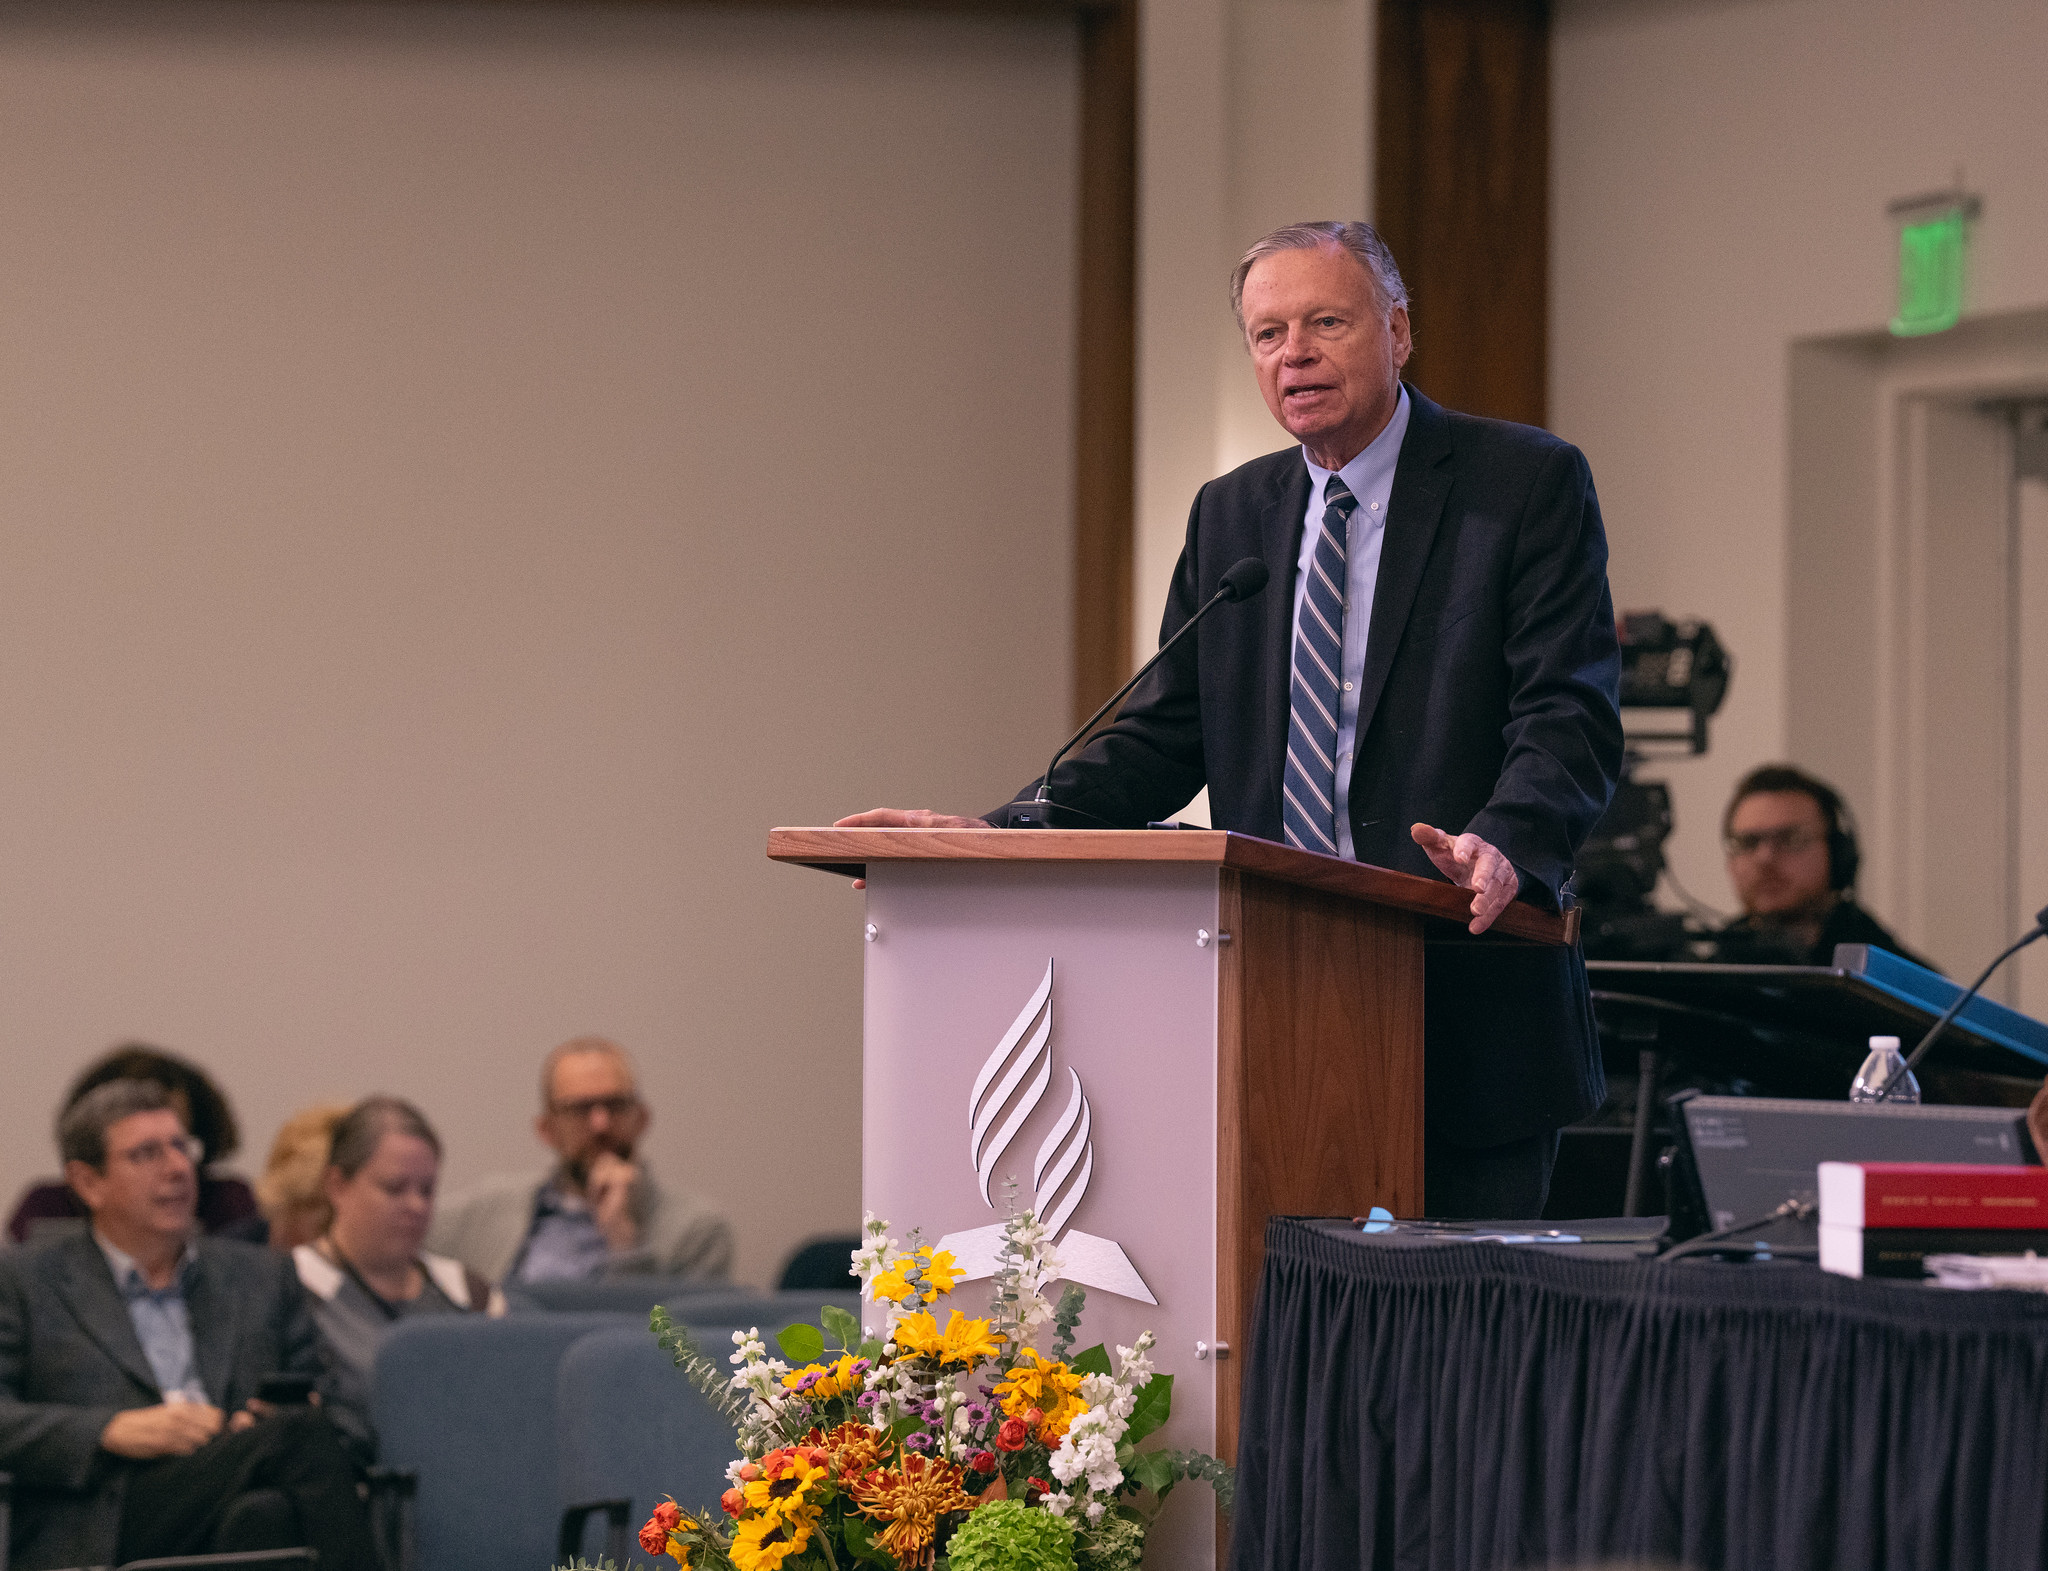 Mark Finley, retired Adventist evangelist, shares about his church planting ministry and ministry for pastors. 